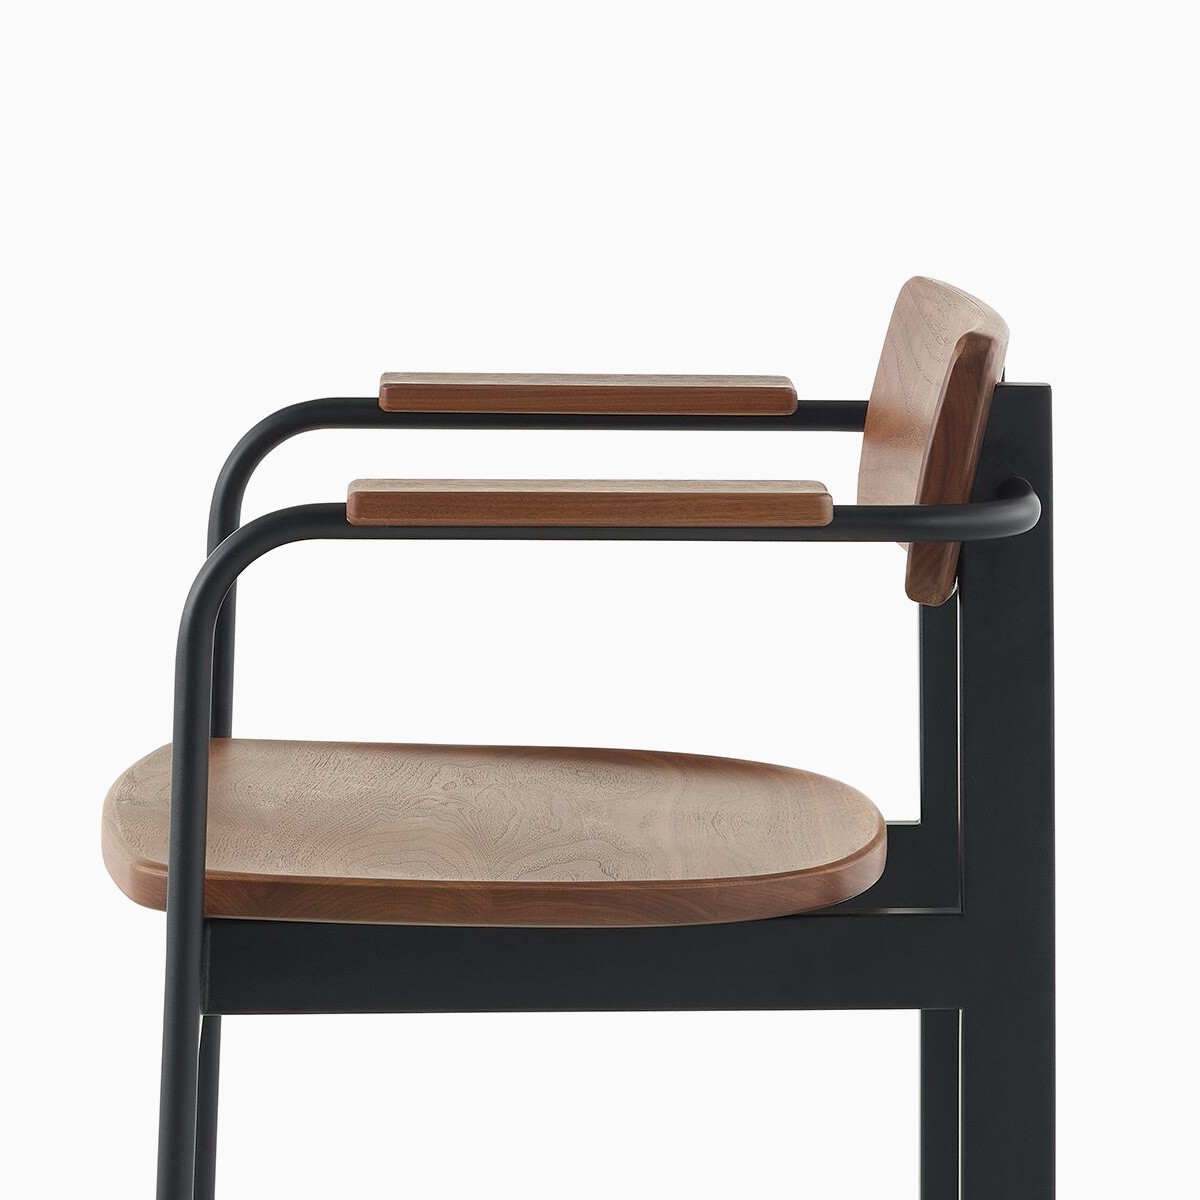 A Betwixt Chair with a walnut backrest, seat, and arms with a black frame. 